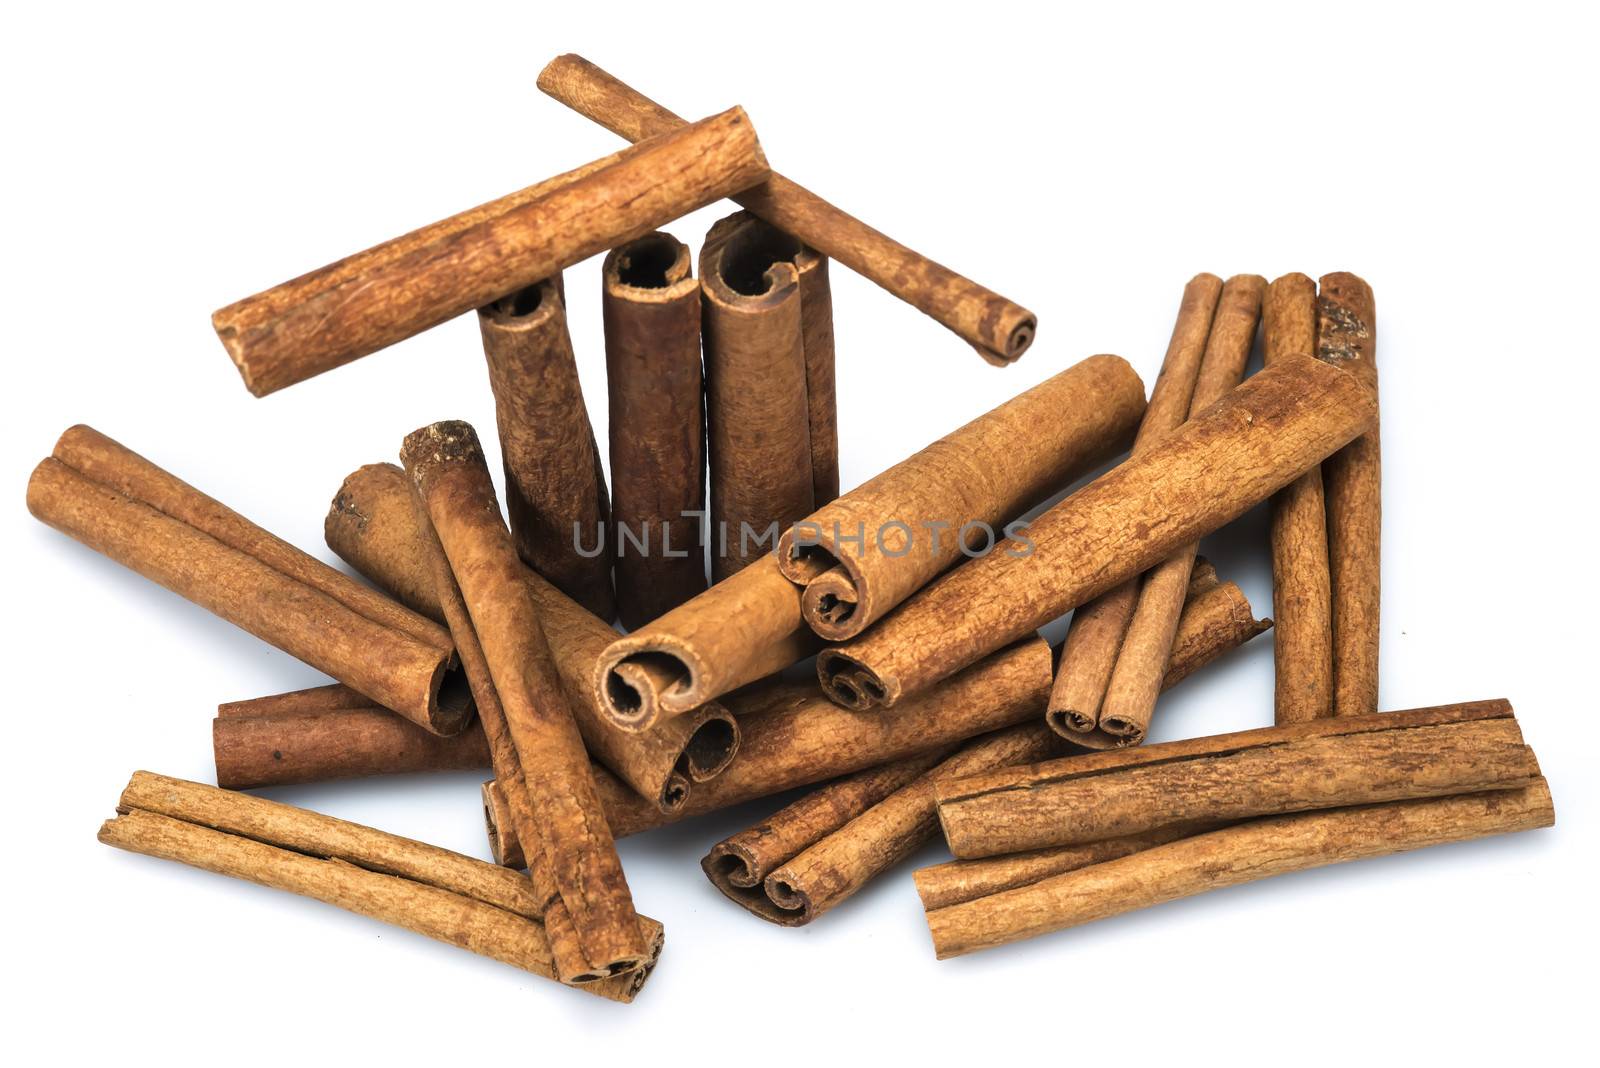 Cinnamon sticks isolated on a white background by angelsimon